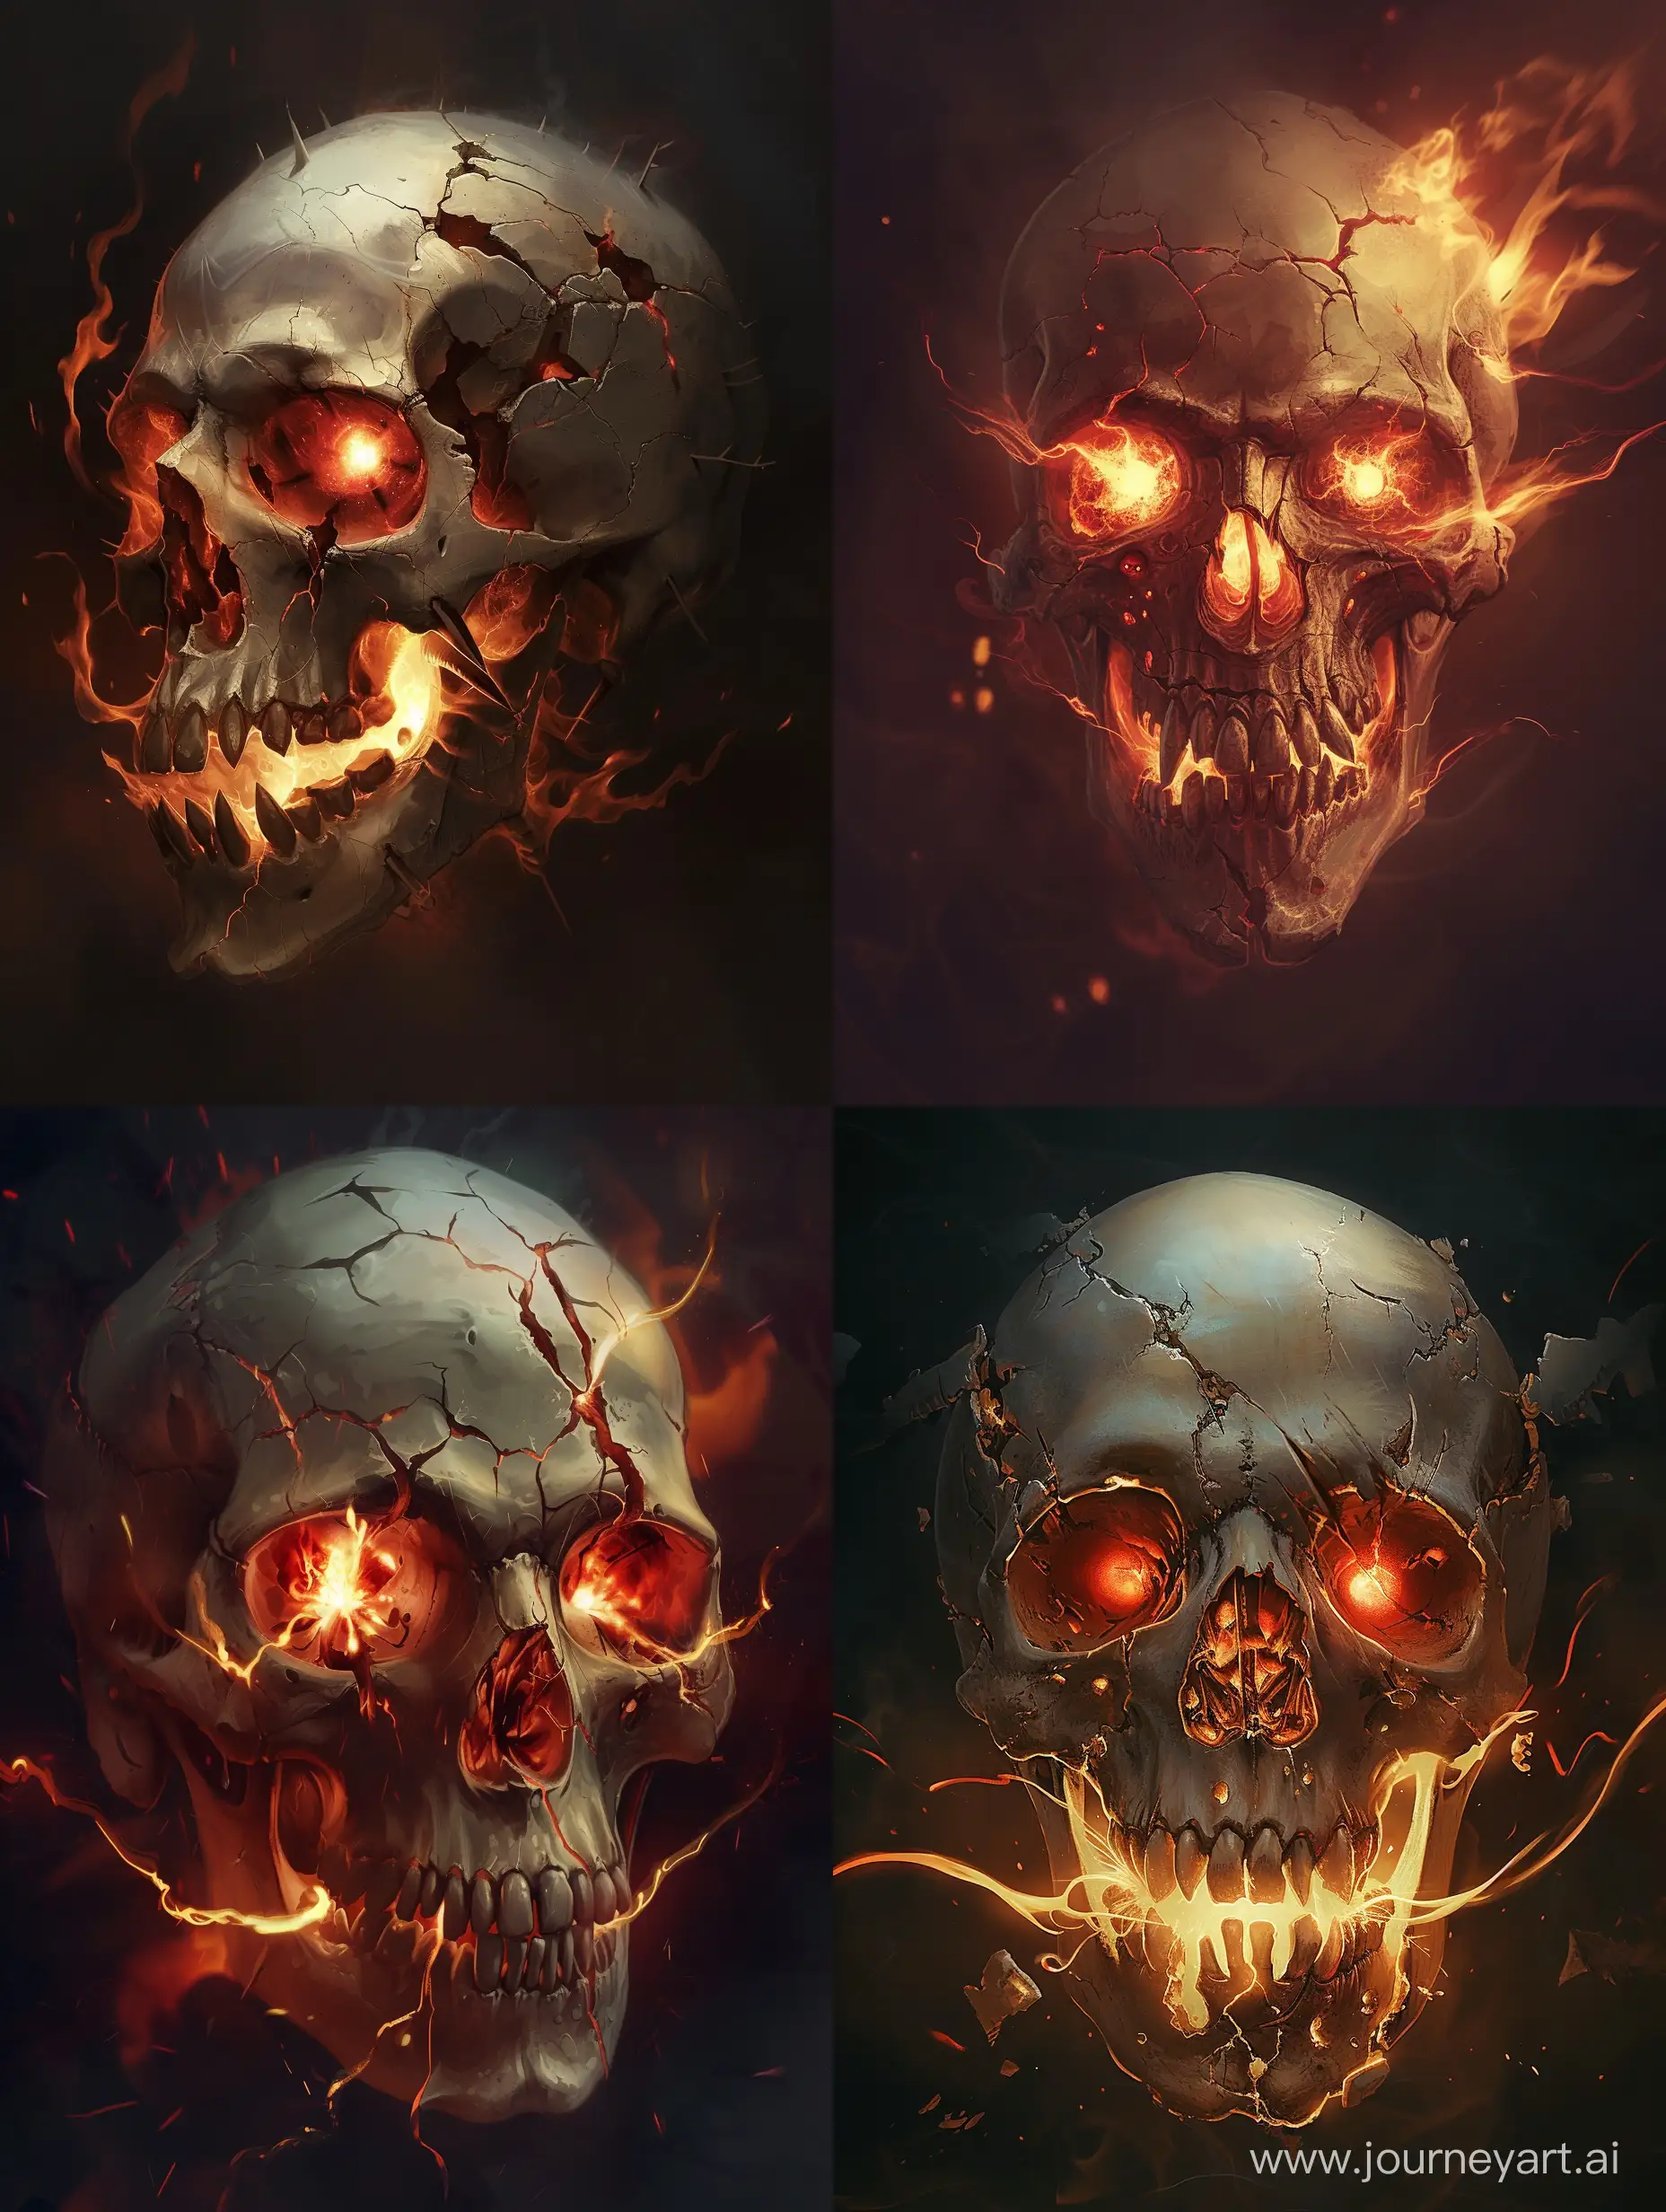 Create an image of a menacing skull with prominent cracks and glowing red eyes. The skull has elongated, sharp teeth and is engulfed in dancing flames. The dark background enhances the ominous and eerie atmosphere, invoking a sense of danger and fear